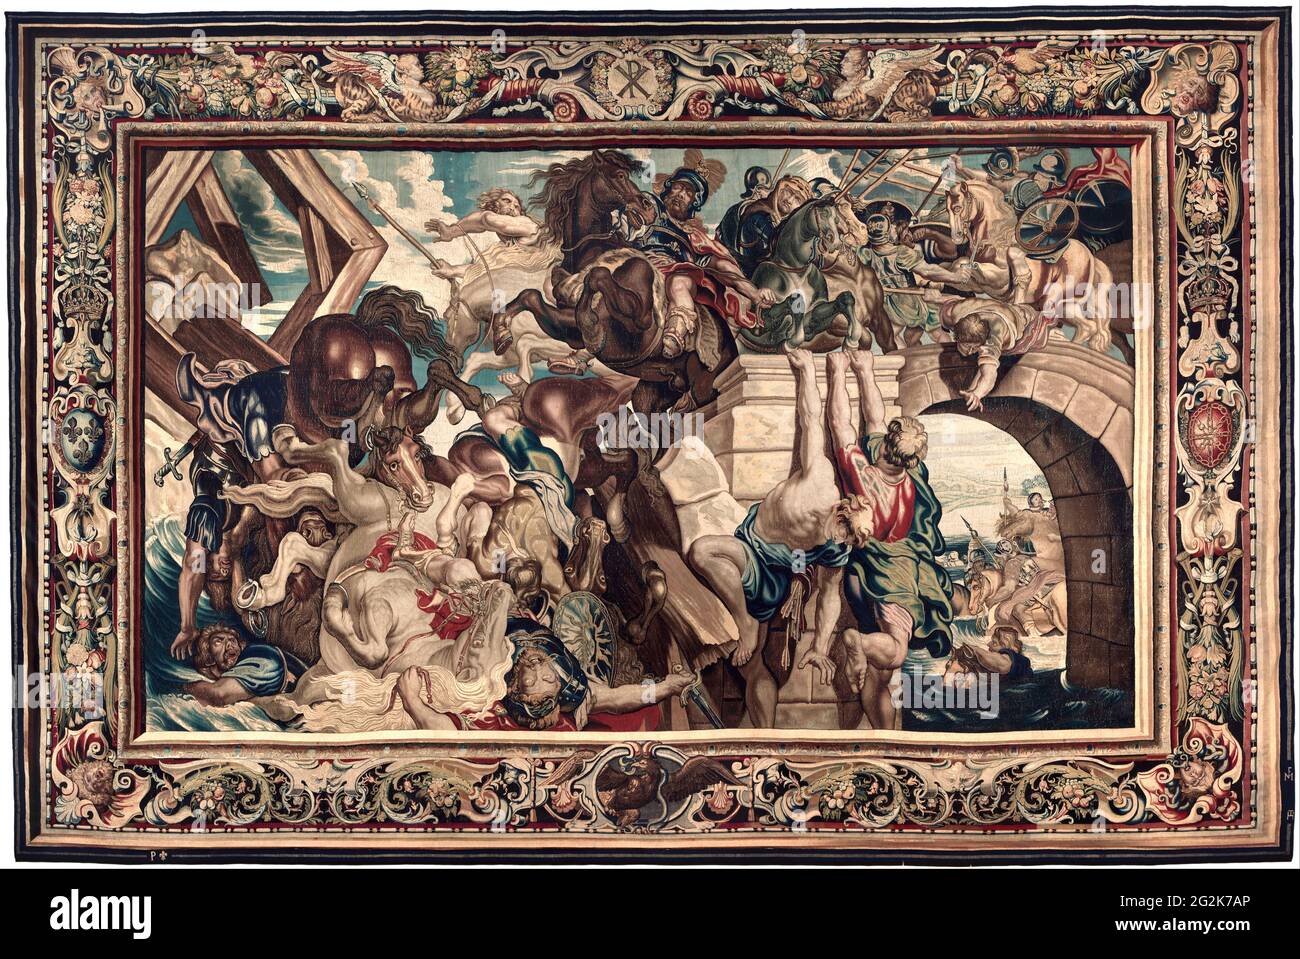 Figural composition designed in 1622 by Peter Paul Rubens - Tapestry showing the Triumph of Constantine over Maxentius at the Battle of the Milvian Bridge Stock Photo